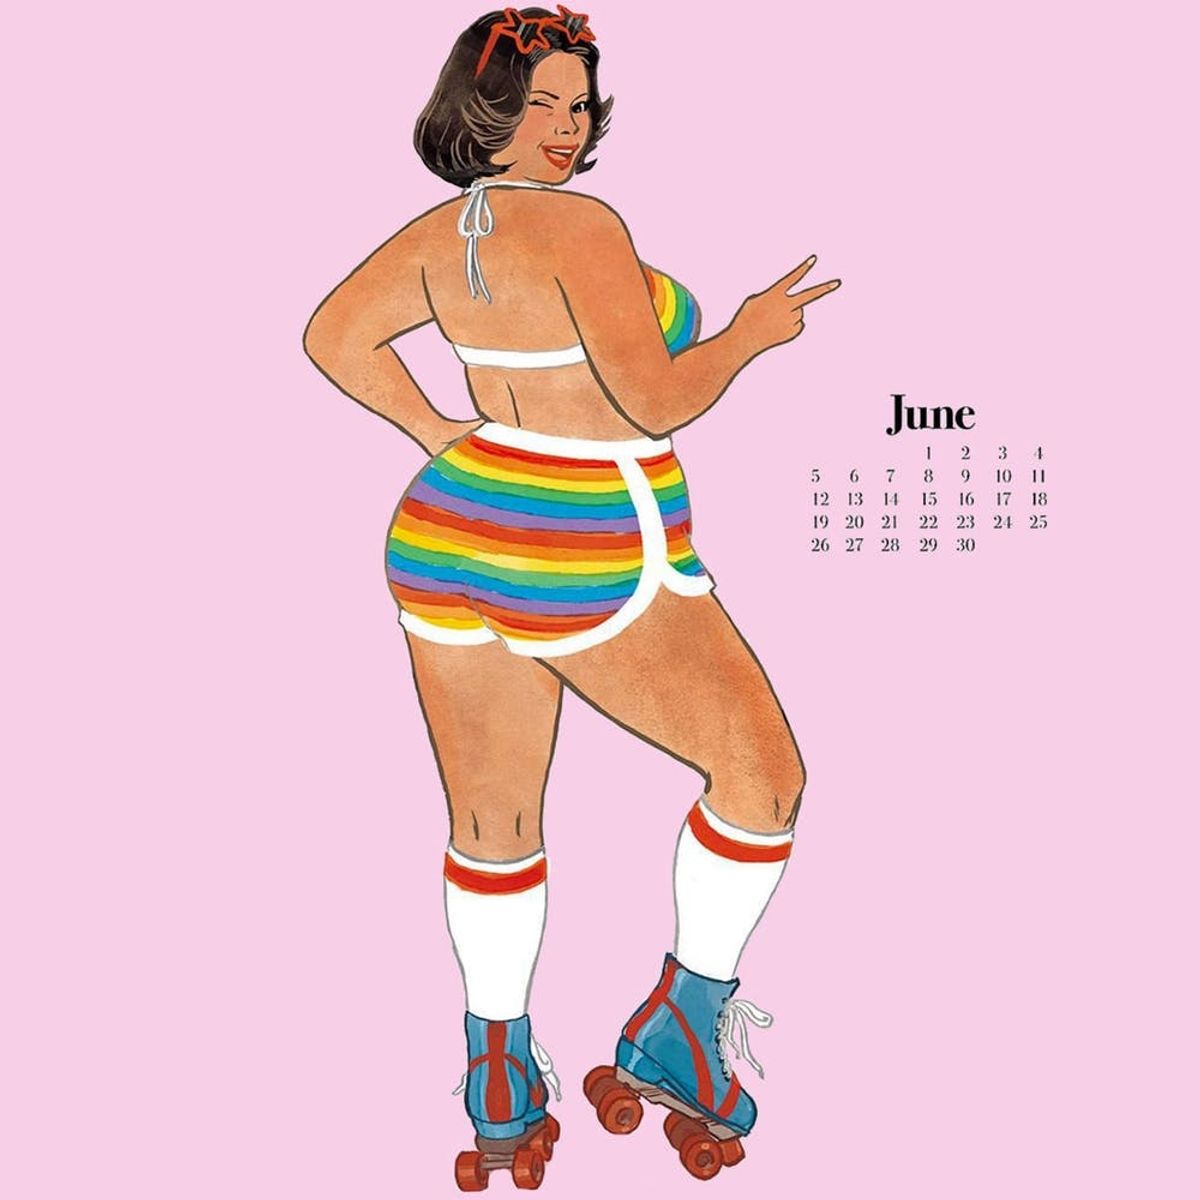 This Gorgeous Body Positive Calendar Is the Best Way to Start the New Year